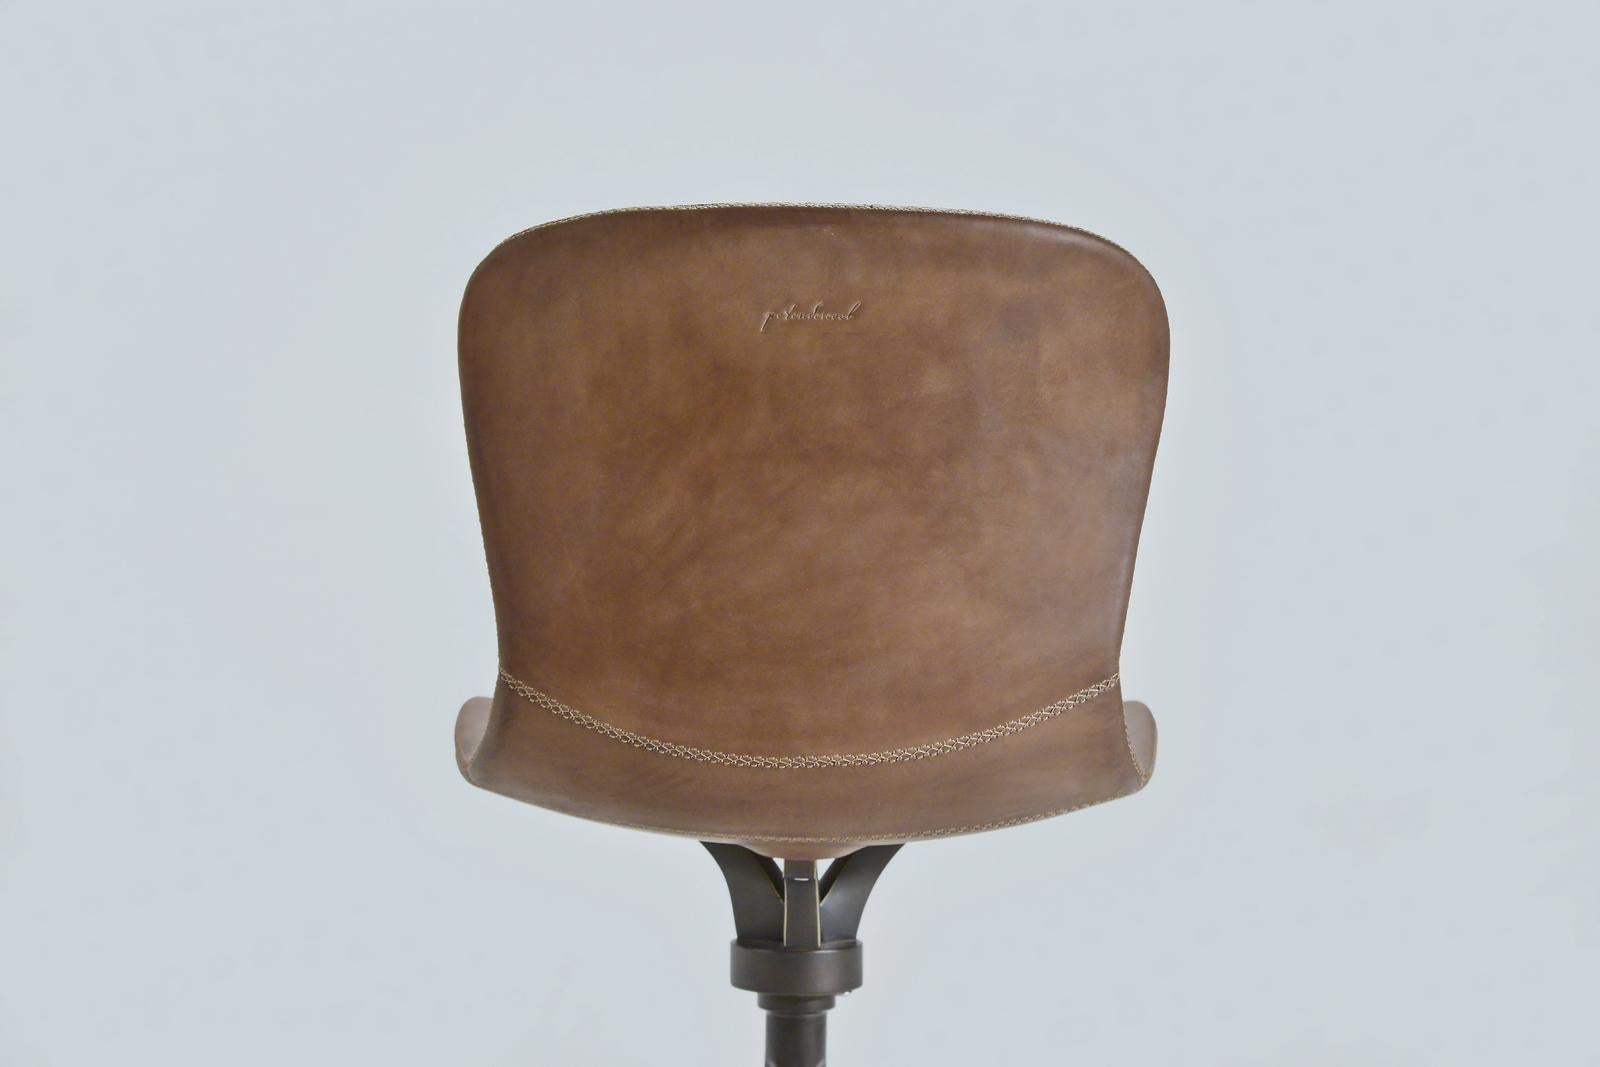 Thai Bespoke Brass Swivel Chair with Floor-Ring, in Truffe Leather, by P. Tendercool For Sale